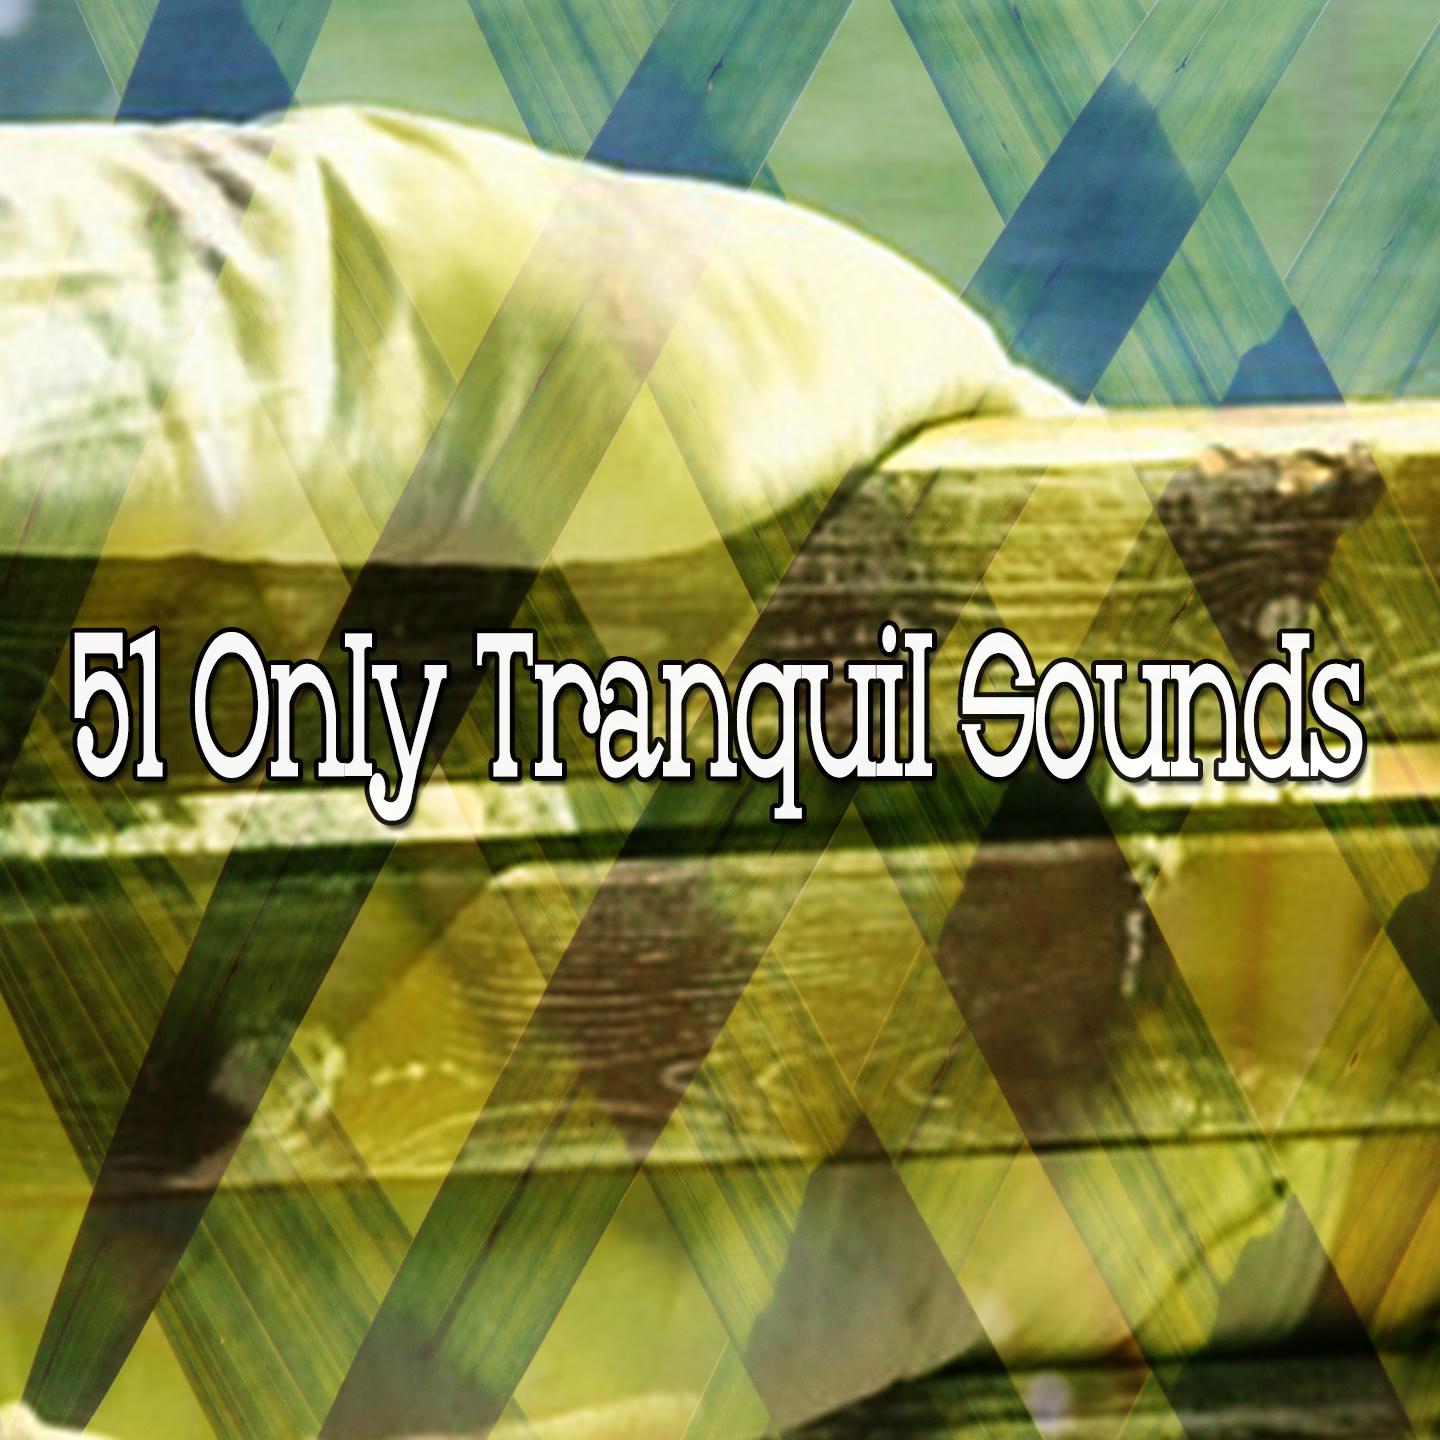 51 Only Tranquil Sounds